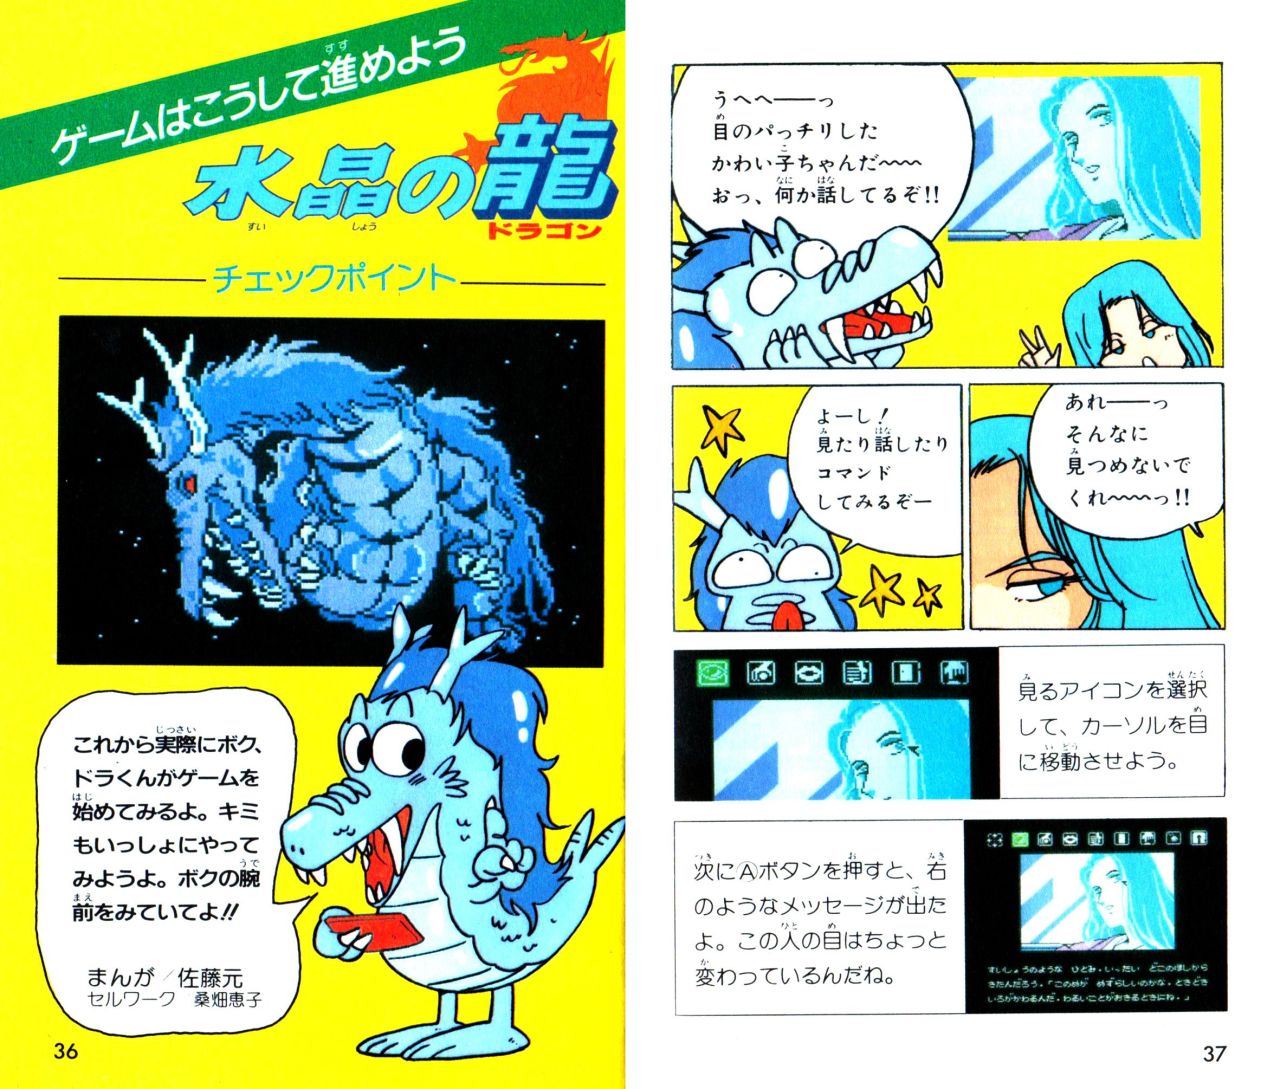 obscurevideogames:  n64thstreet:  BREAK TIME: Manga/manual highlights from Square’s